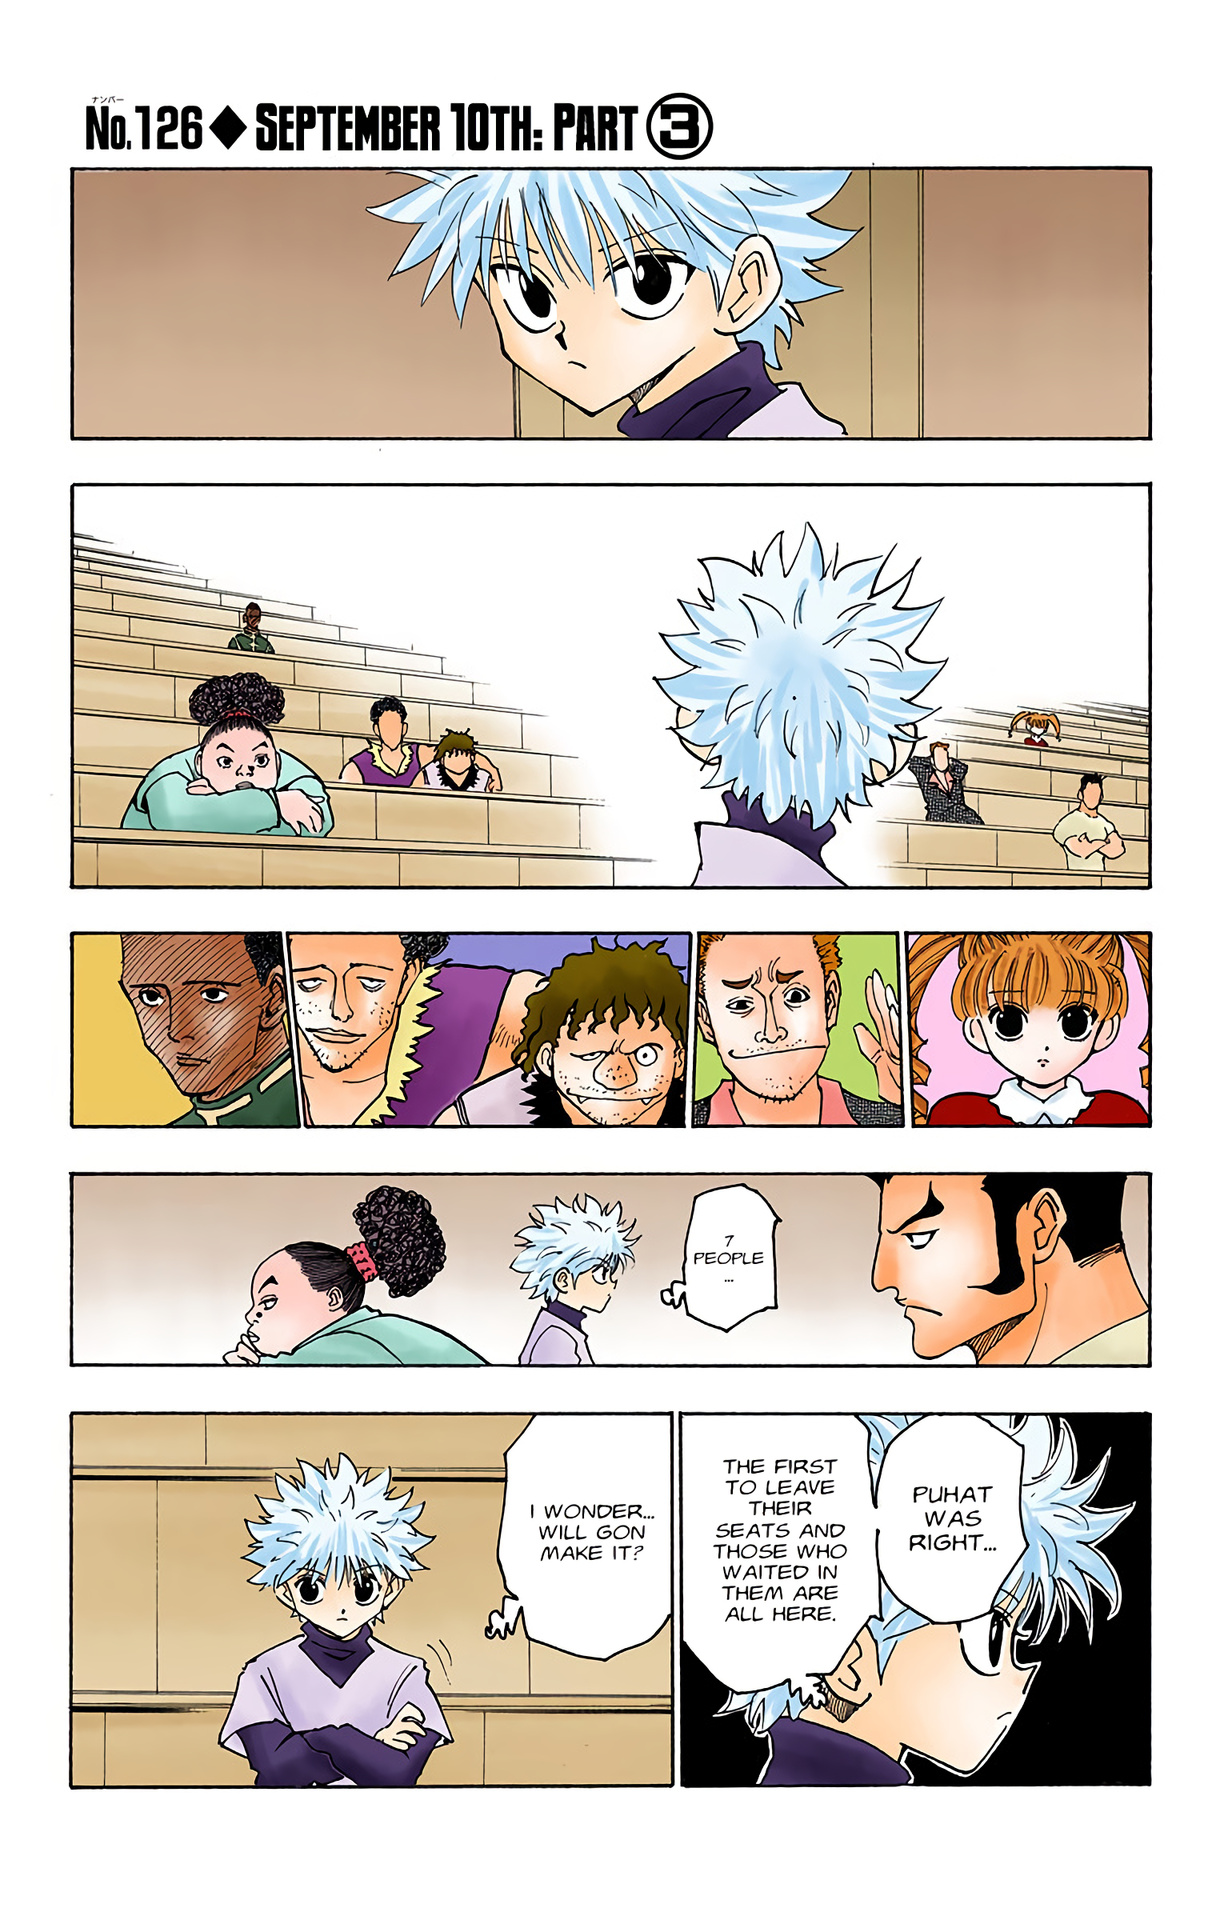 Hunter X Hunter Full Color Vol.13 Chapter 126: September 10Th: Part 3 - Picture 1